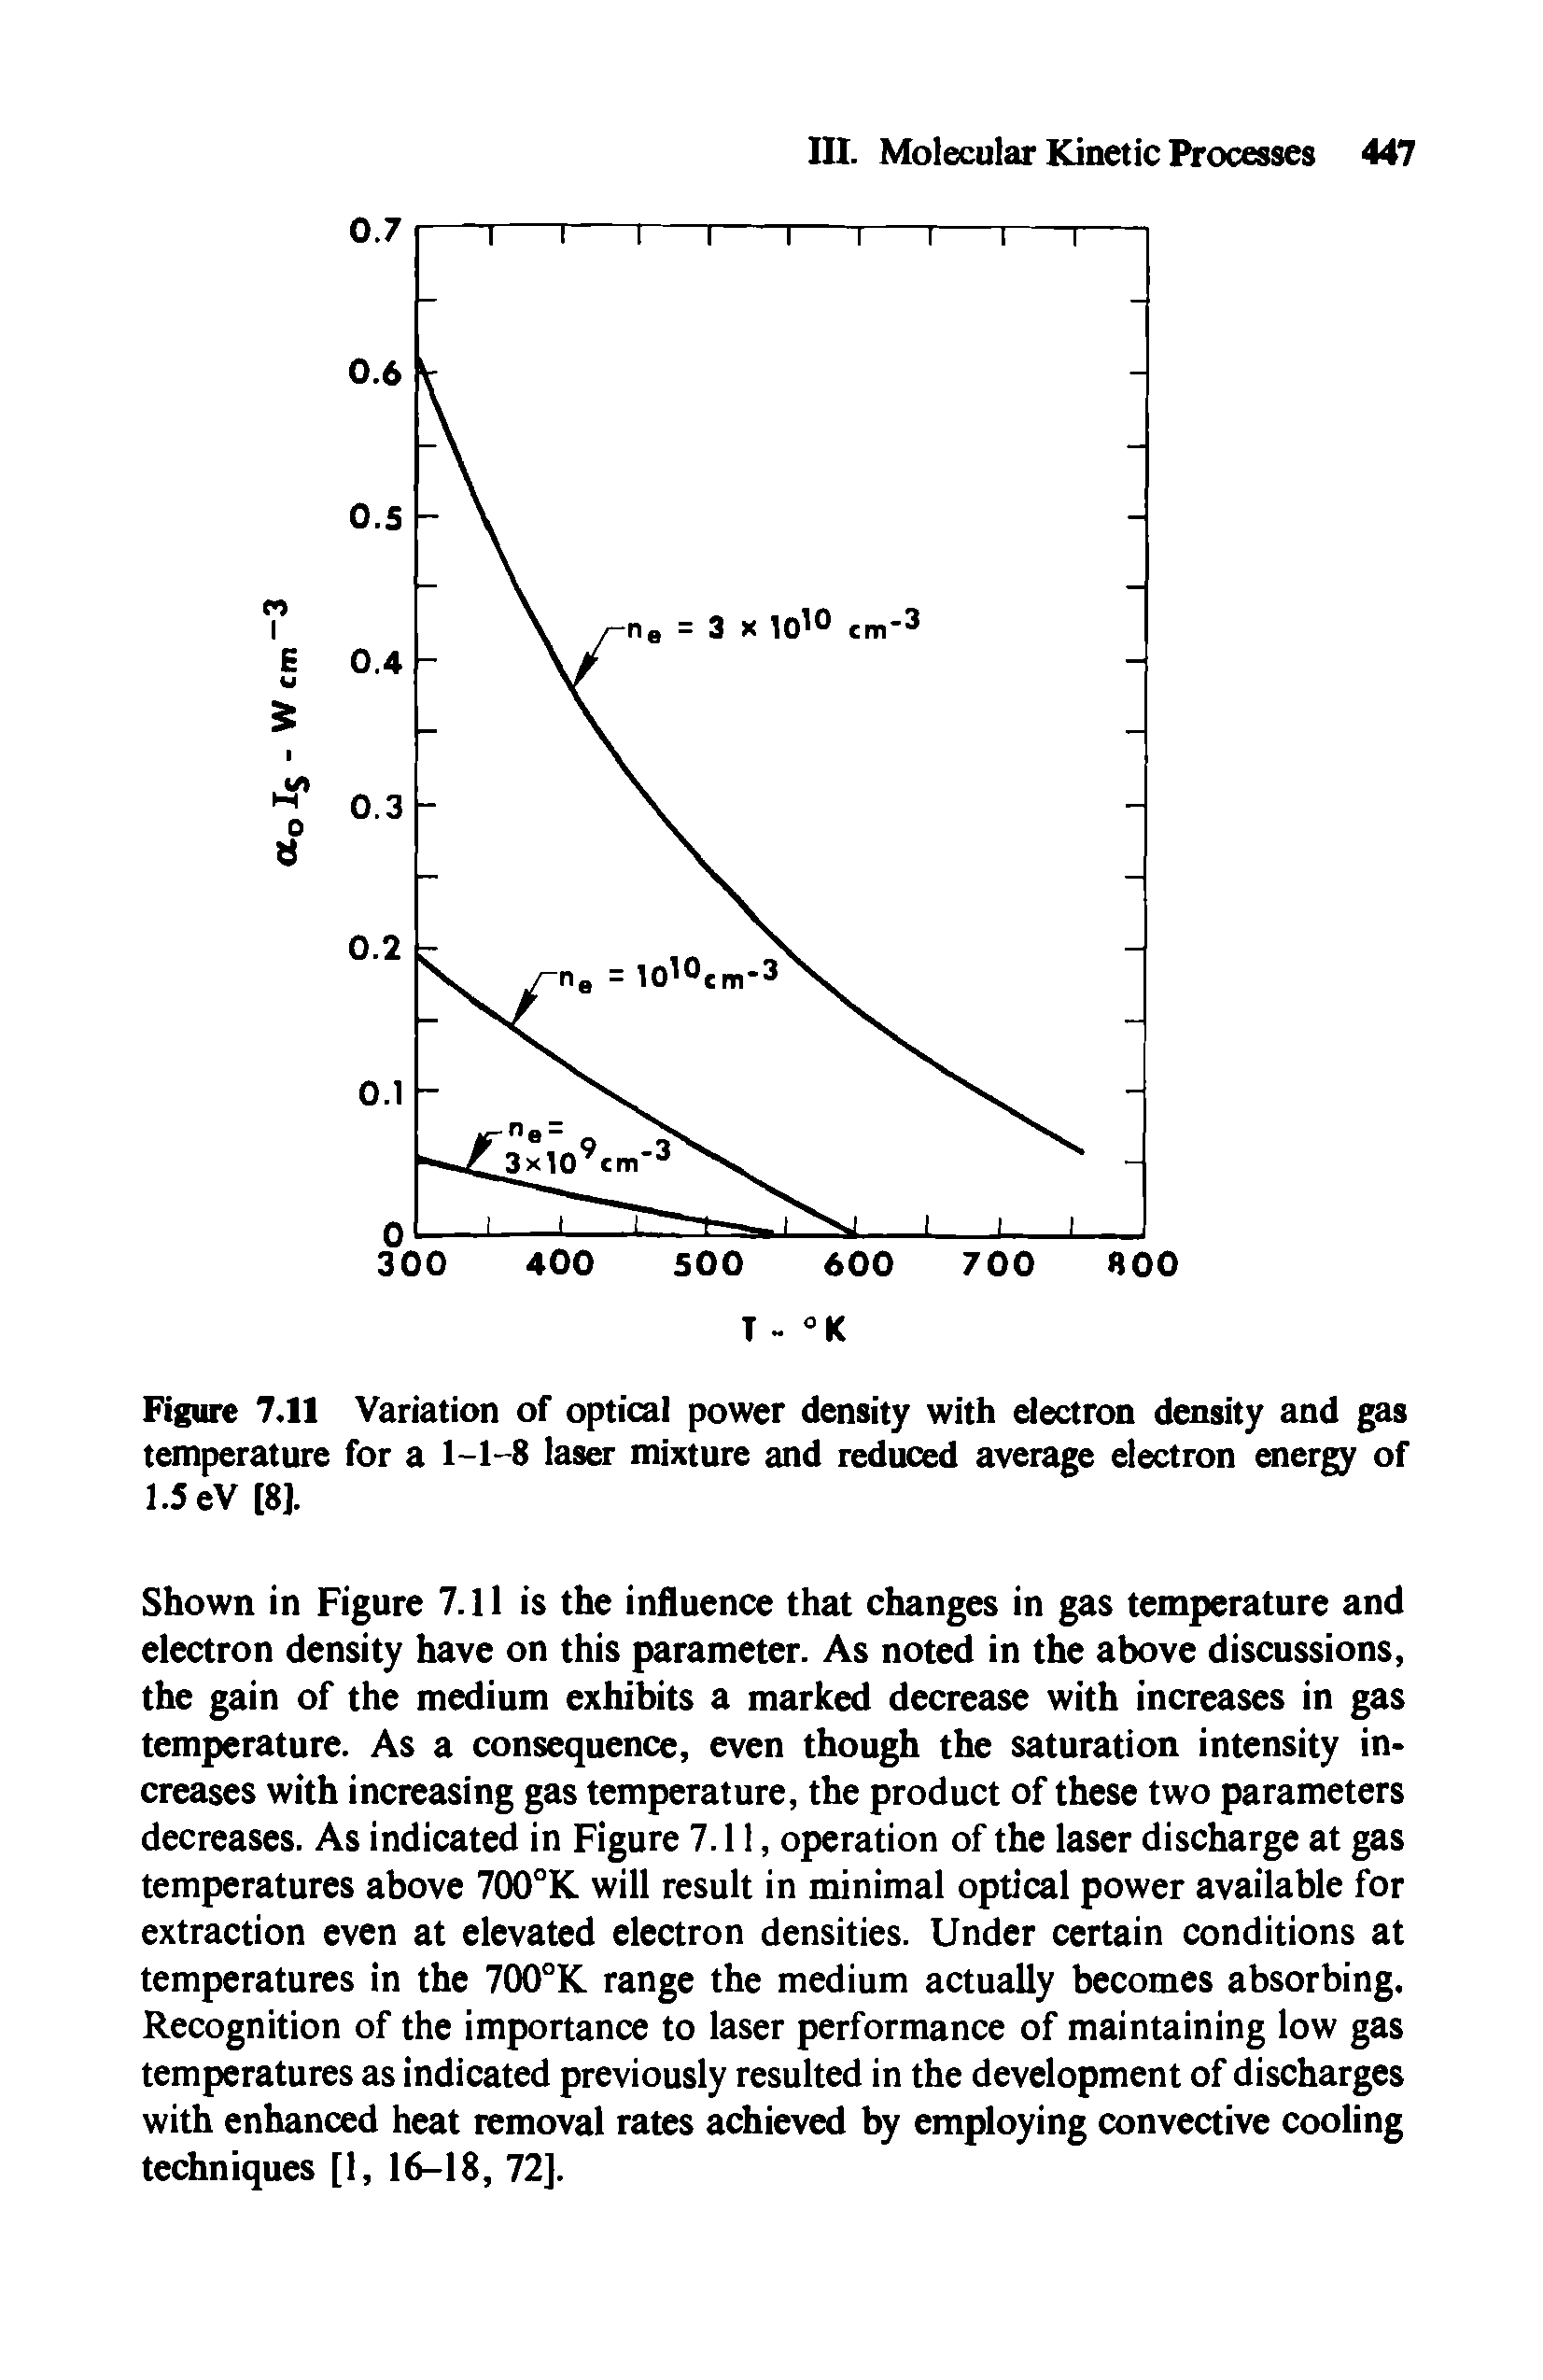 Figure 7.11 Variation of optical power density with electron density and gas temperature for a 1-1-8 laser mixture and reduced average electron energy of 1.5 eV [8].